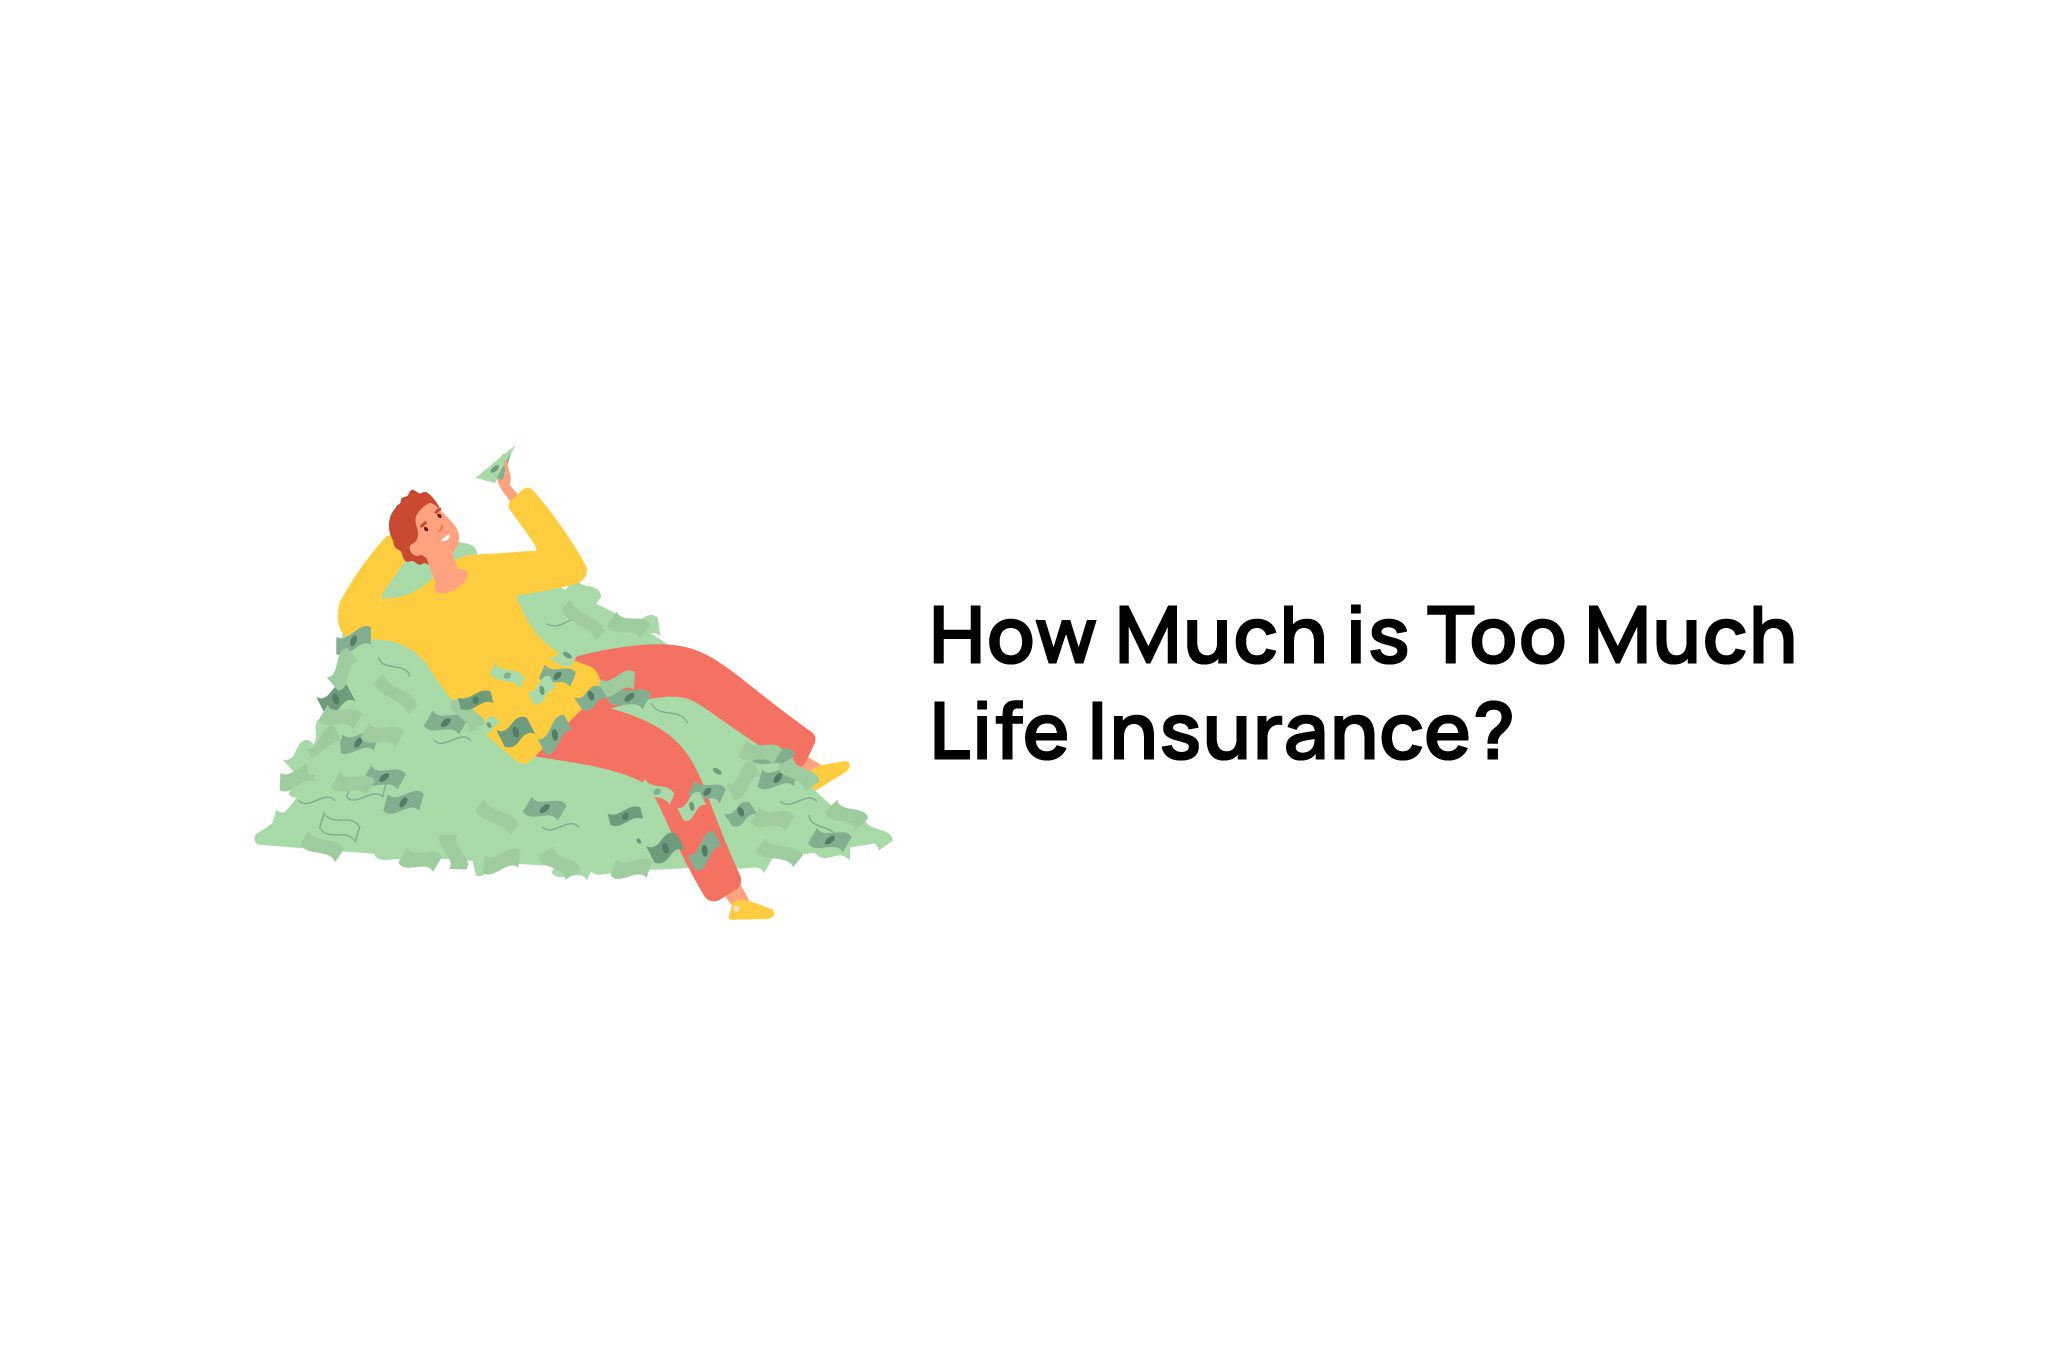 How much is too much life insurance